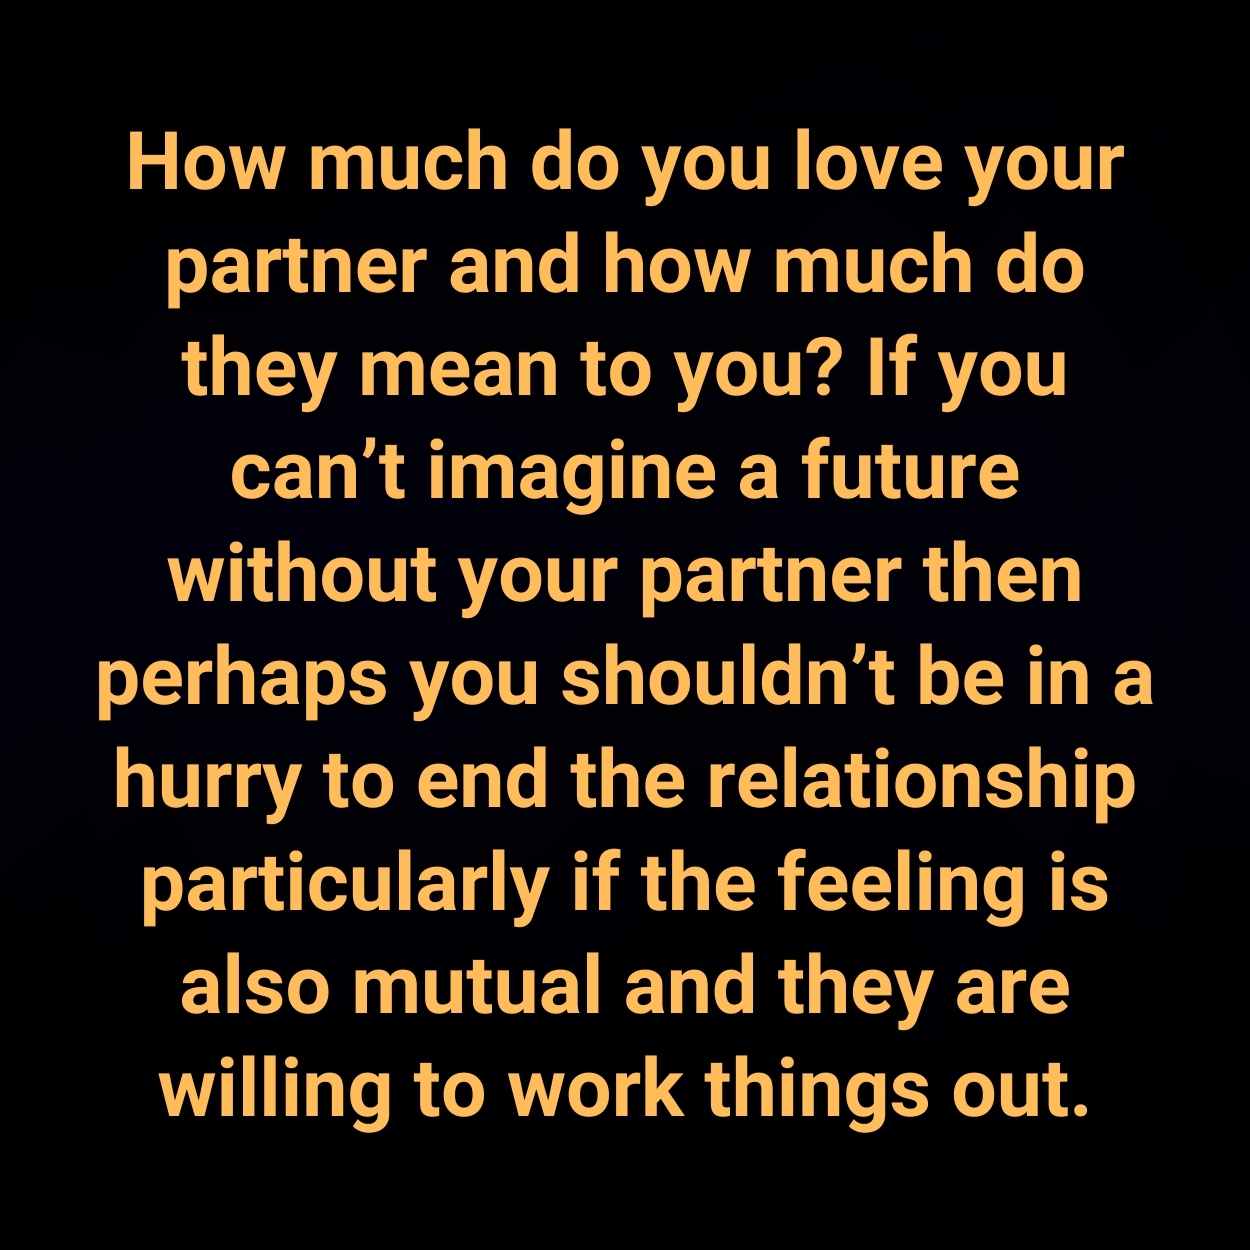 How much do you love your partner and how much do they mean to you? If you can’t imagine a future without your partner then perhaps you shouldn’t be in a hurry to end the relationship particularly if the feeling is also mutual and they are willing to work things out.